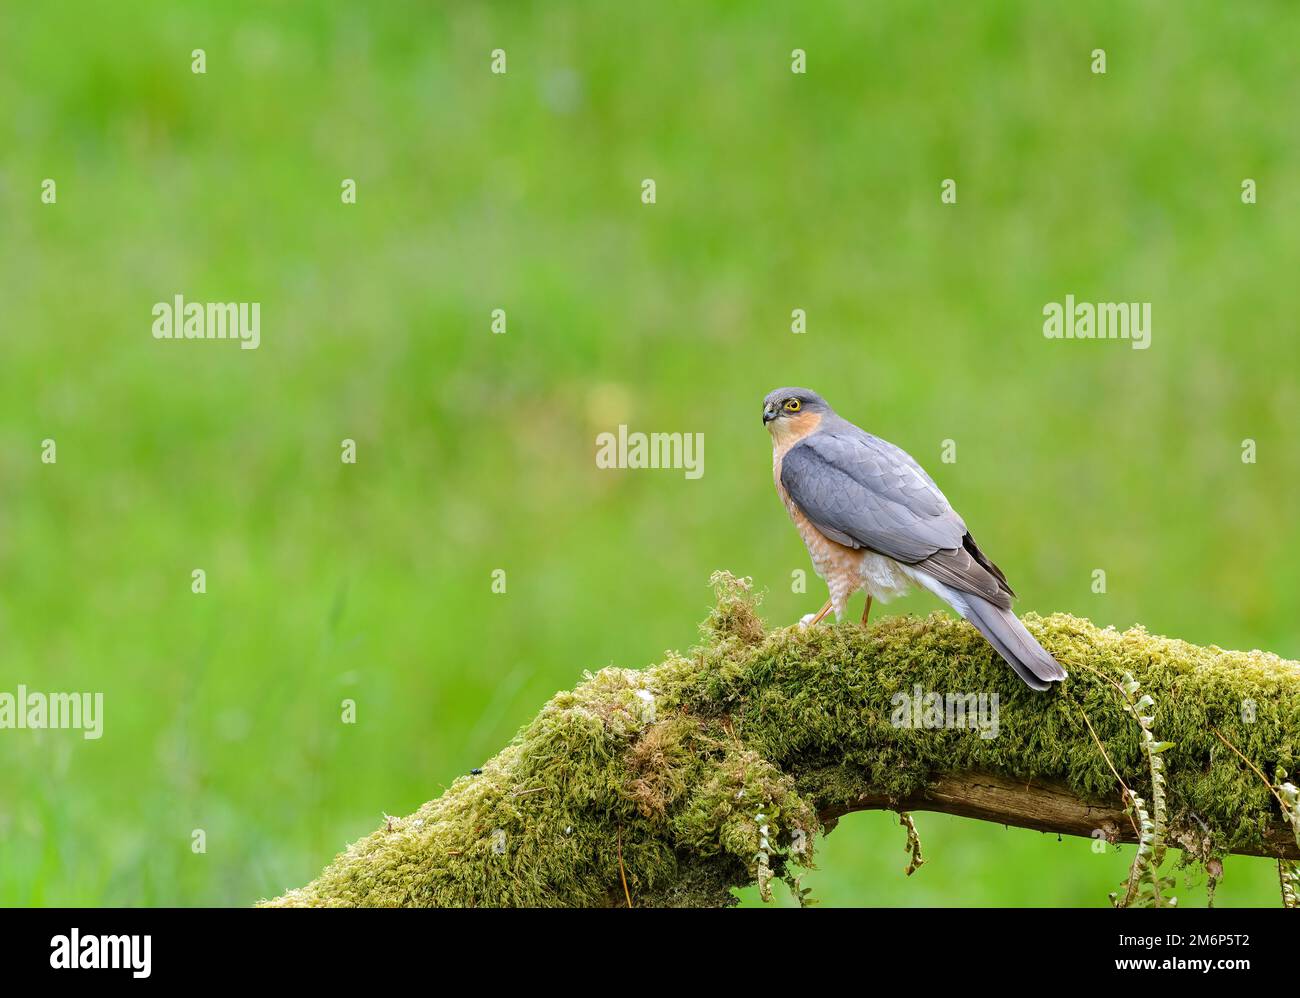 Sparrowhawk, Accipiter Nisus, on a lichen and moss covered log, in a woodland setting Stock Photo